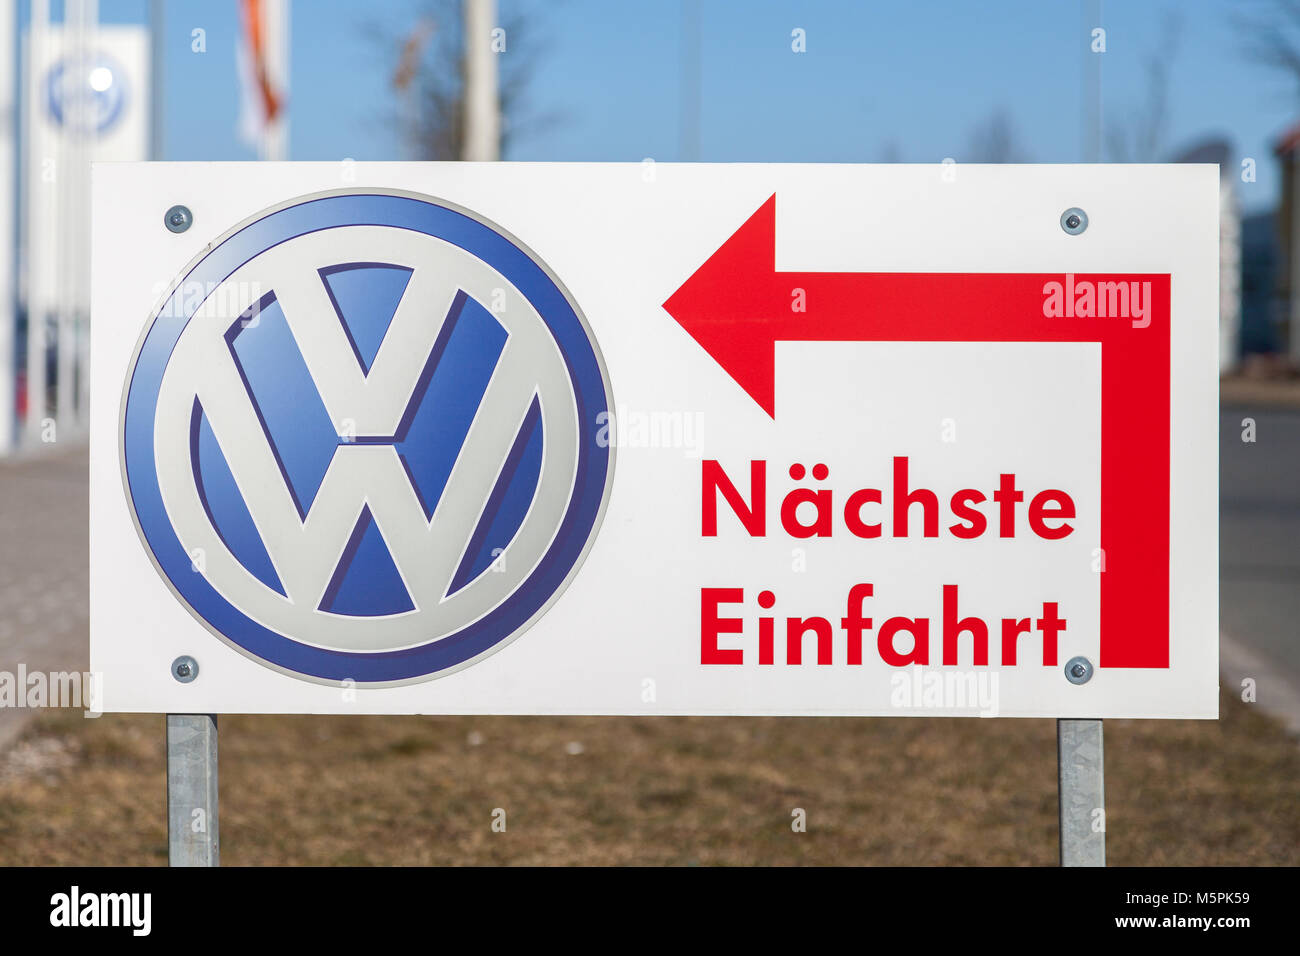 FUERTH / GERMANY - FEBRUARY 25, 2018: Volkswagen logo near a car dealer. Naechste Einfahrt means next entry. Volkswagen is a German automaker founded  Stock Photo